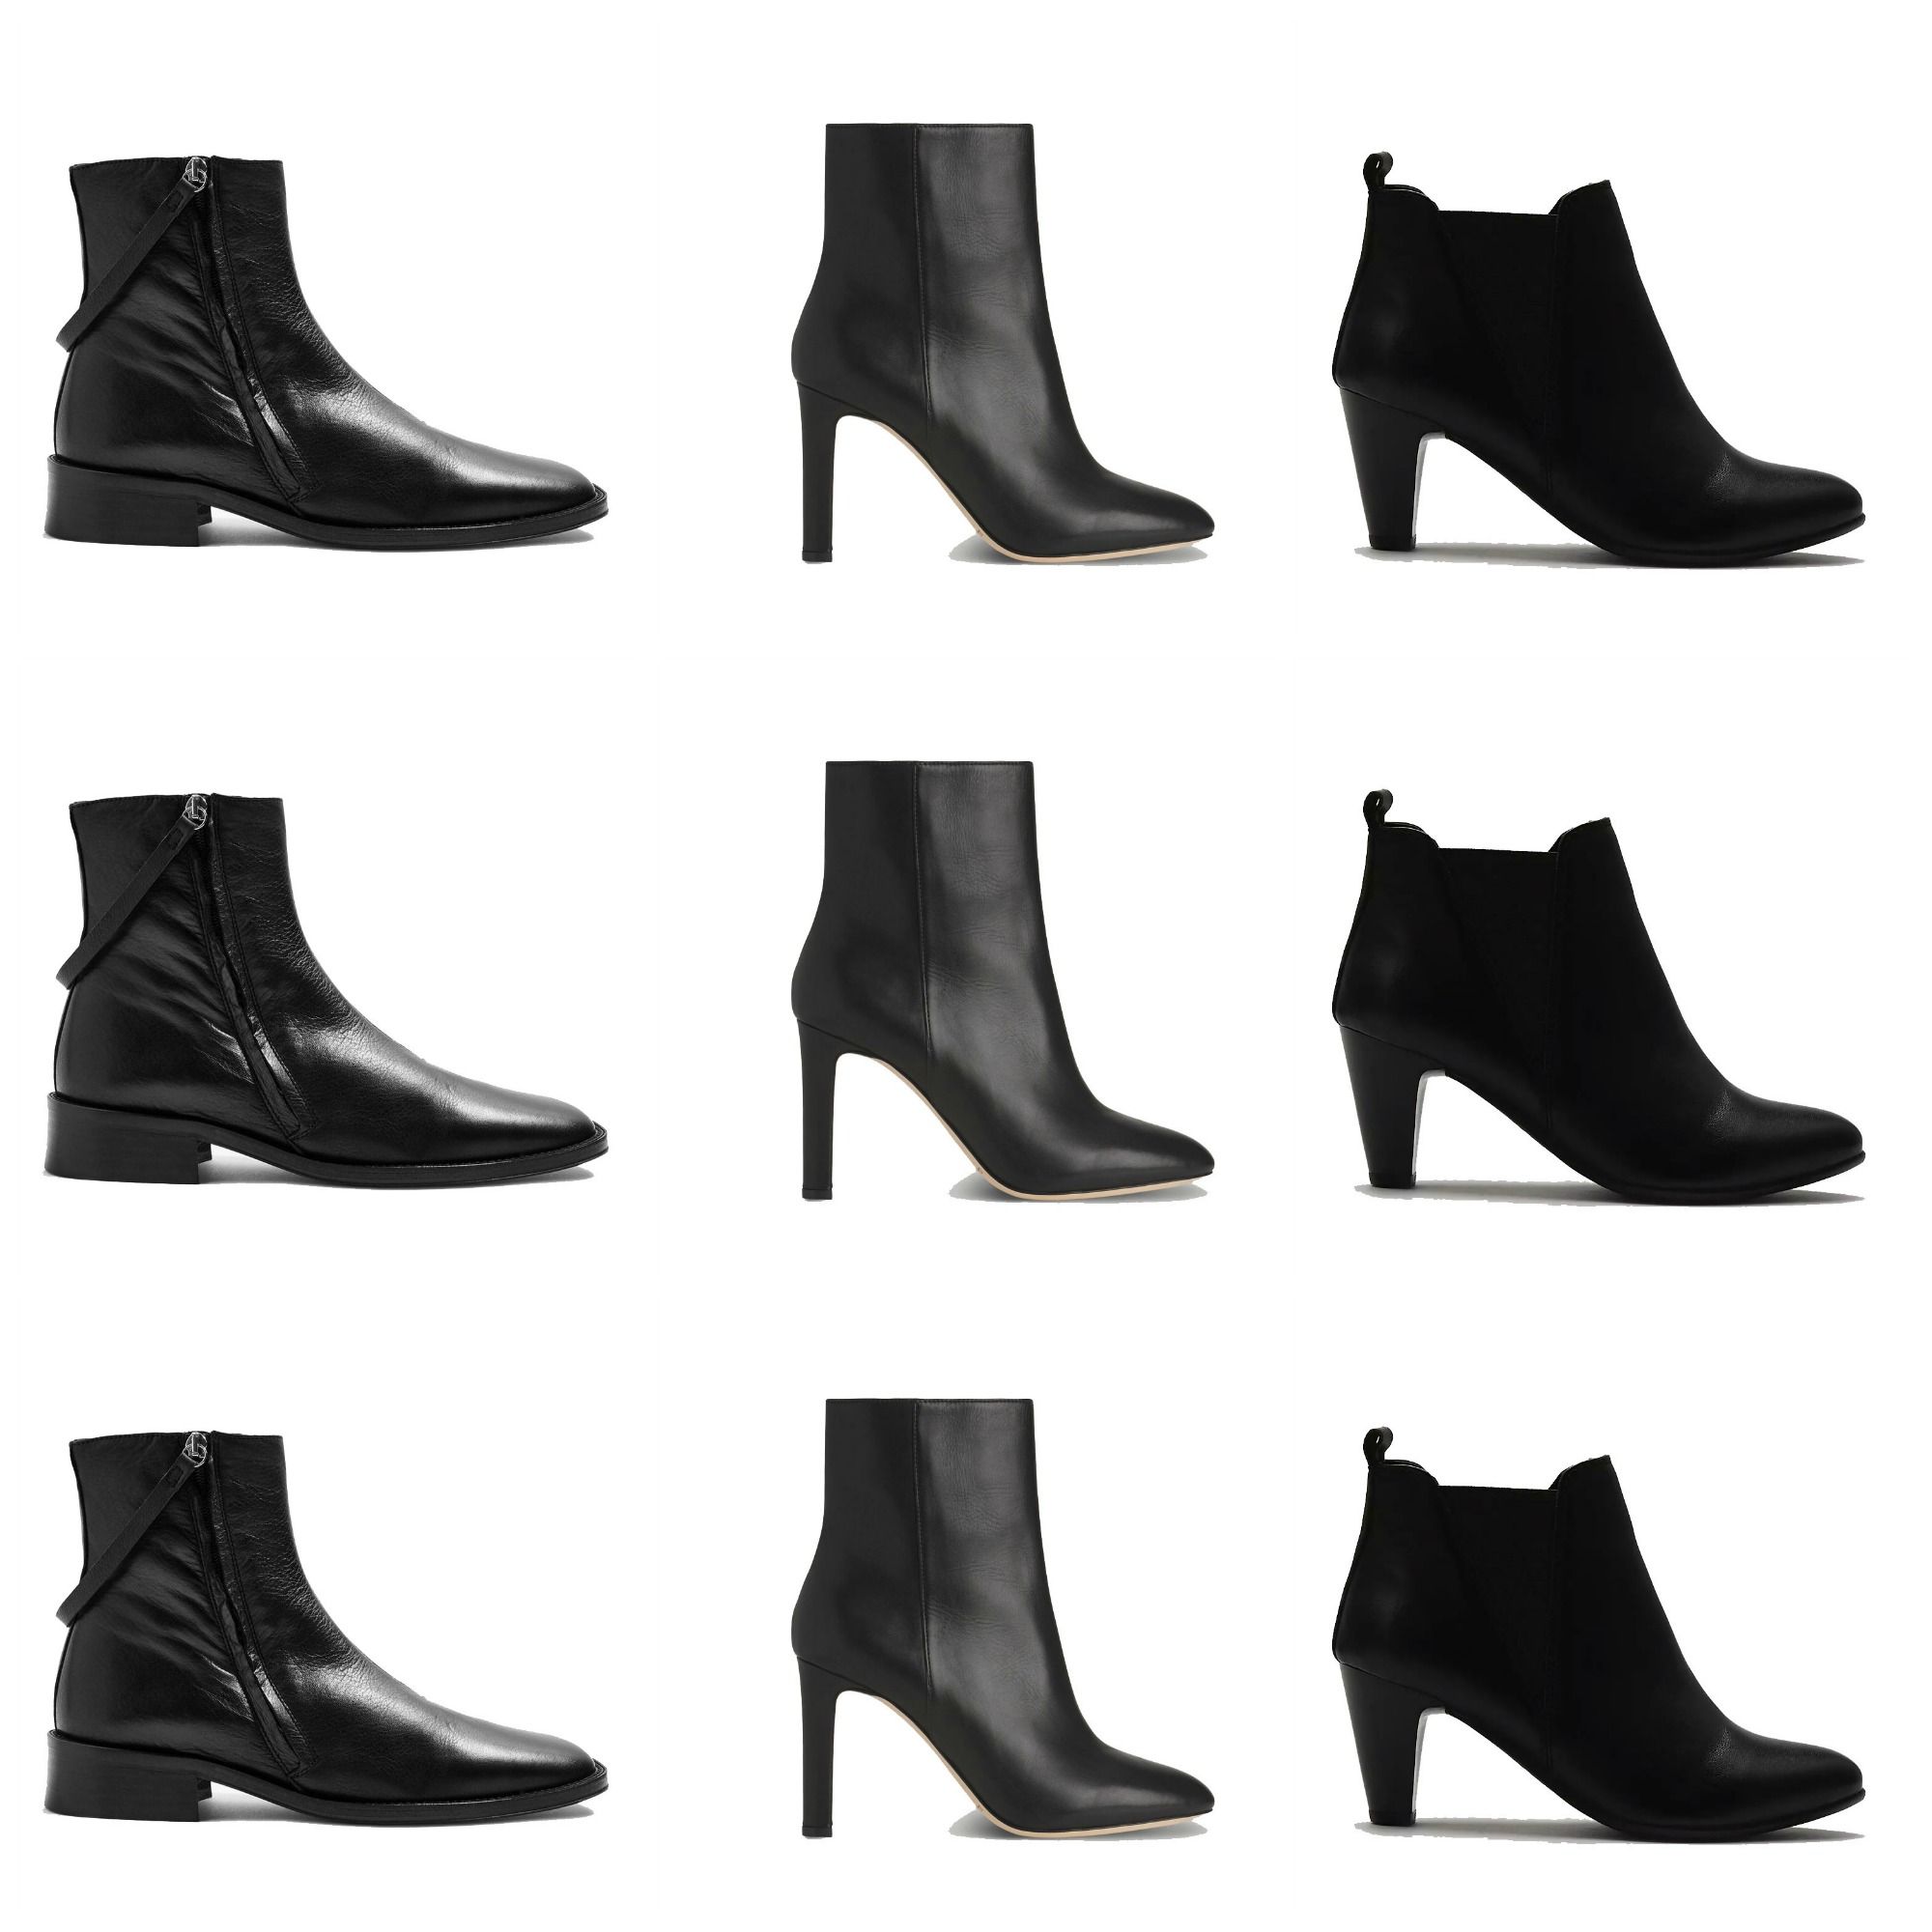 Buy Black Boots for Women by Steppings Online | Ajio.com